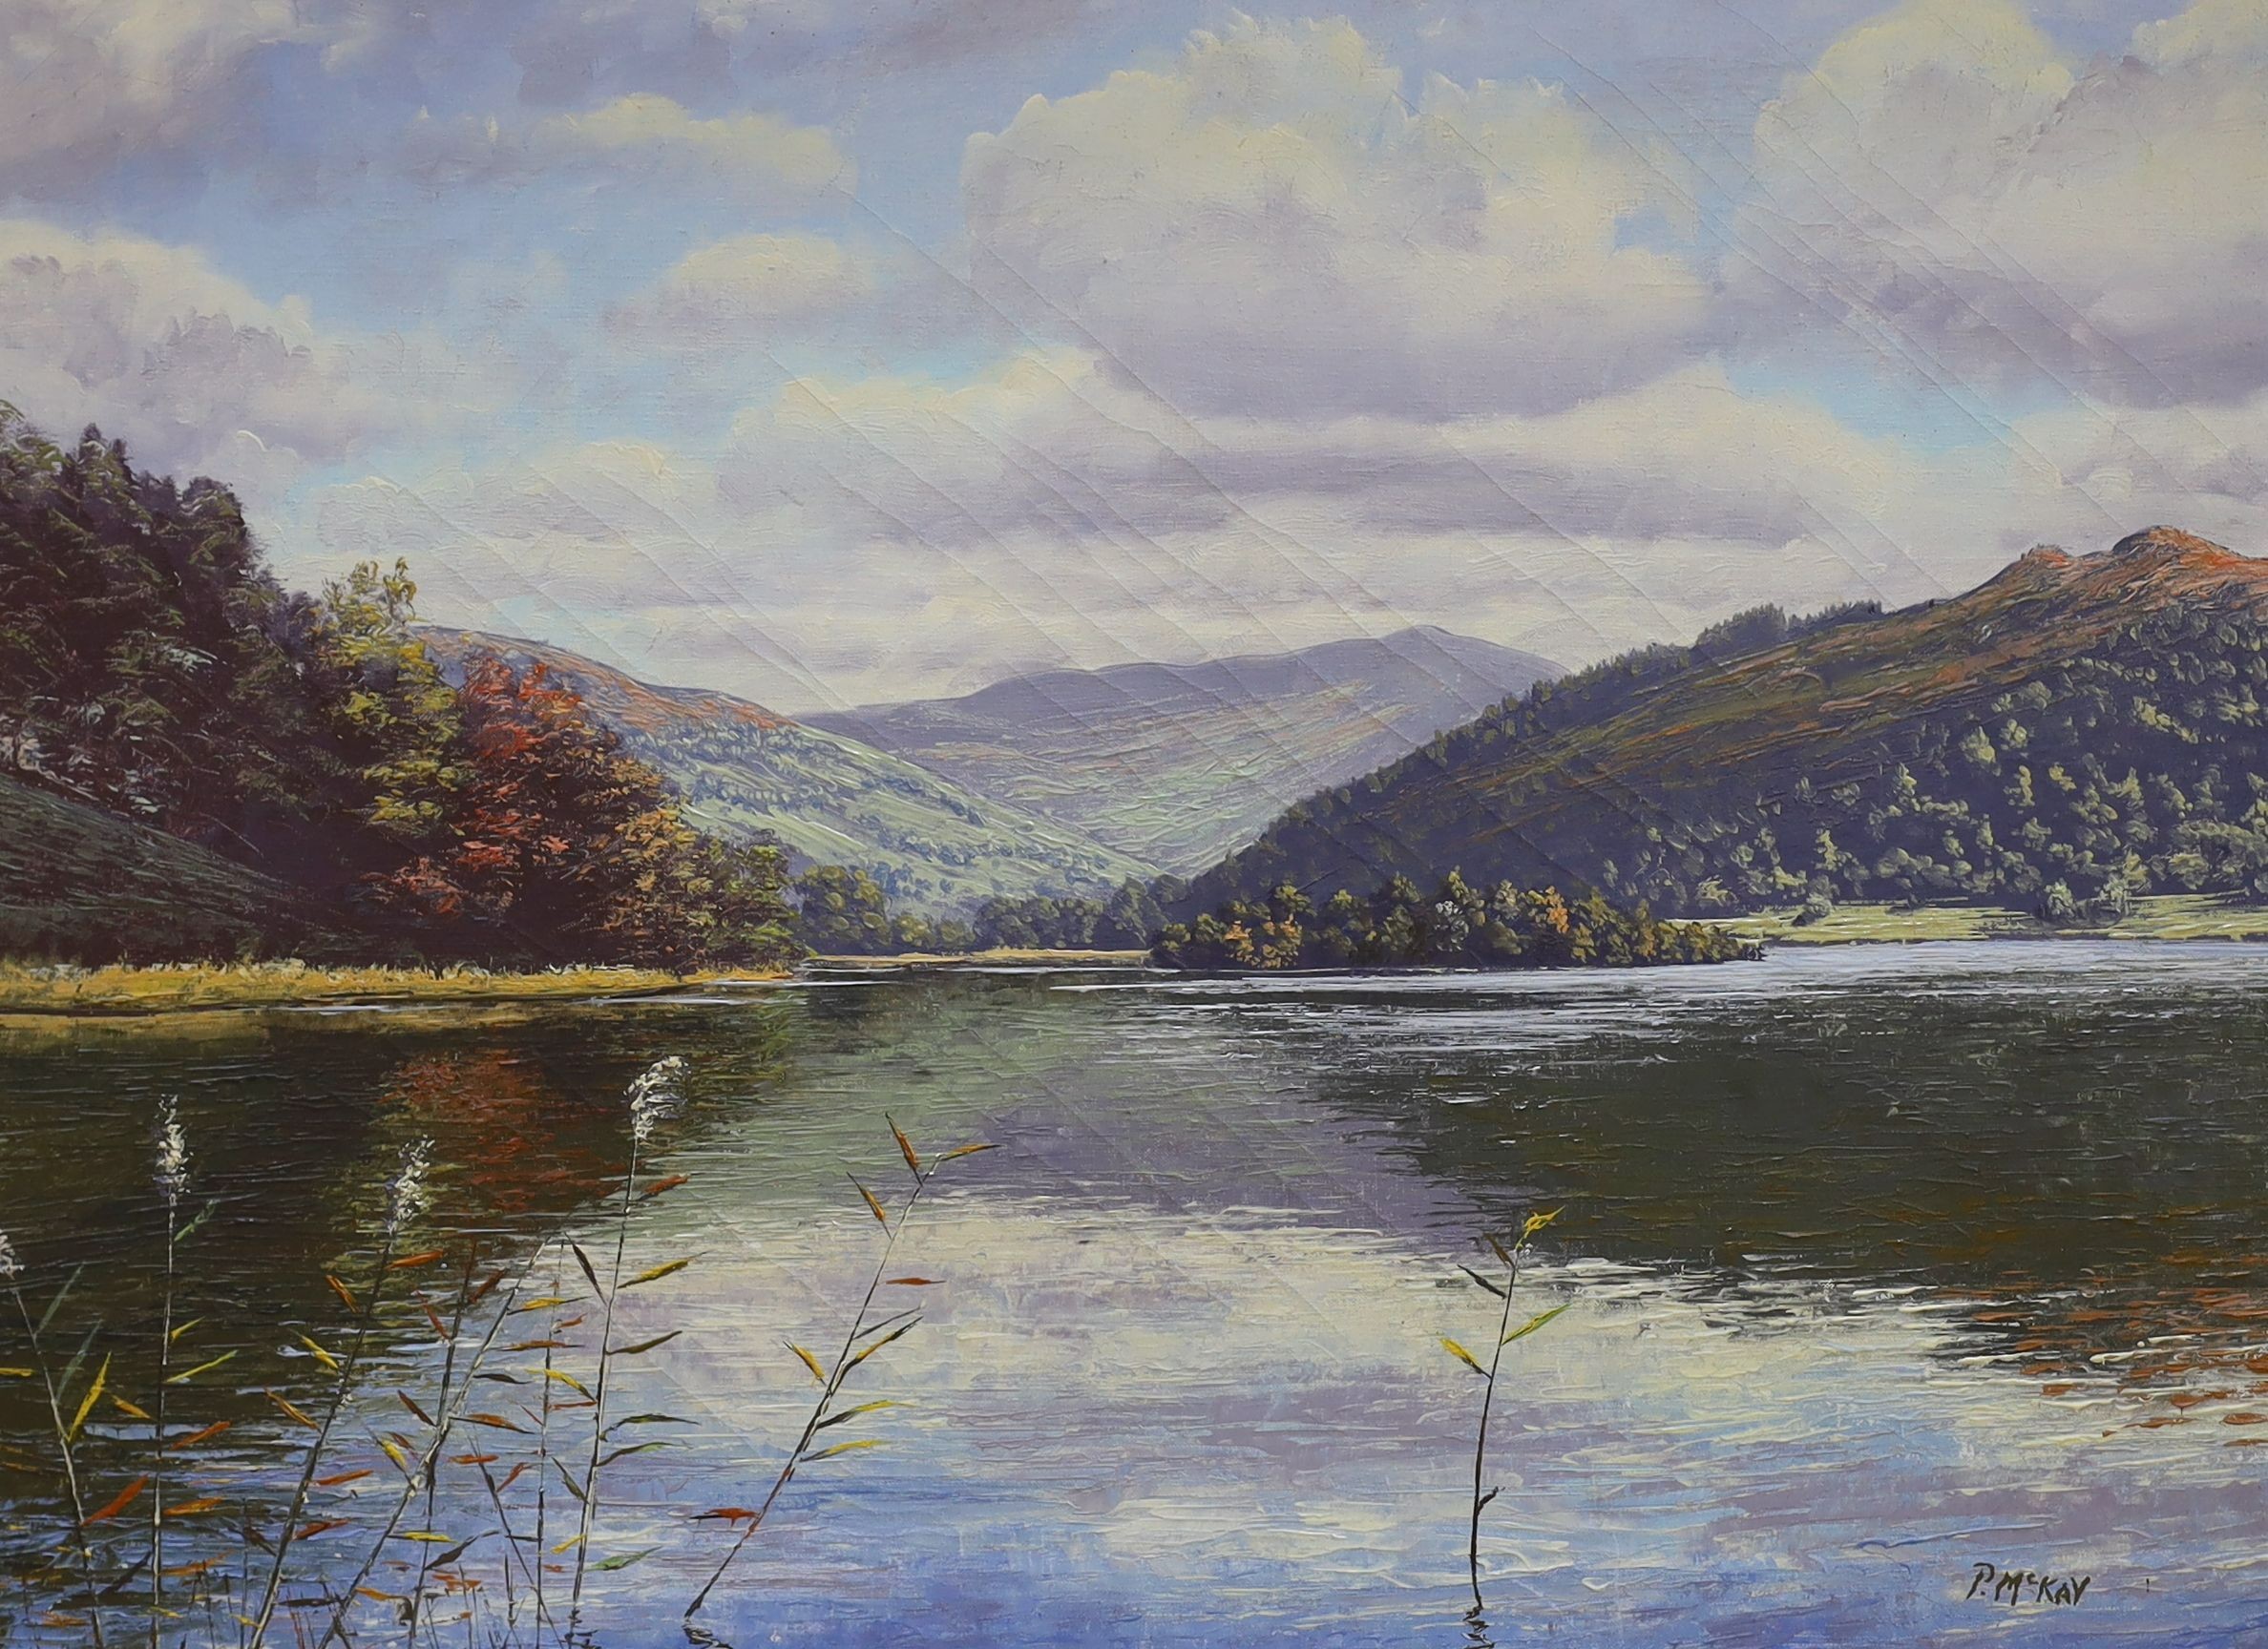 P. McKay, oil on canvas, Rydal Water 41x60cm